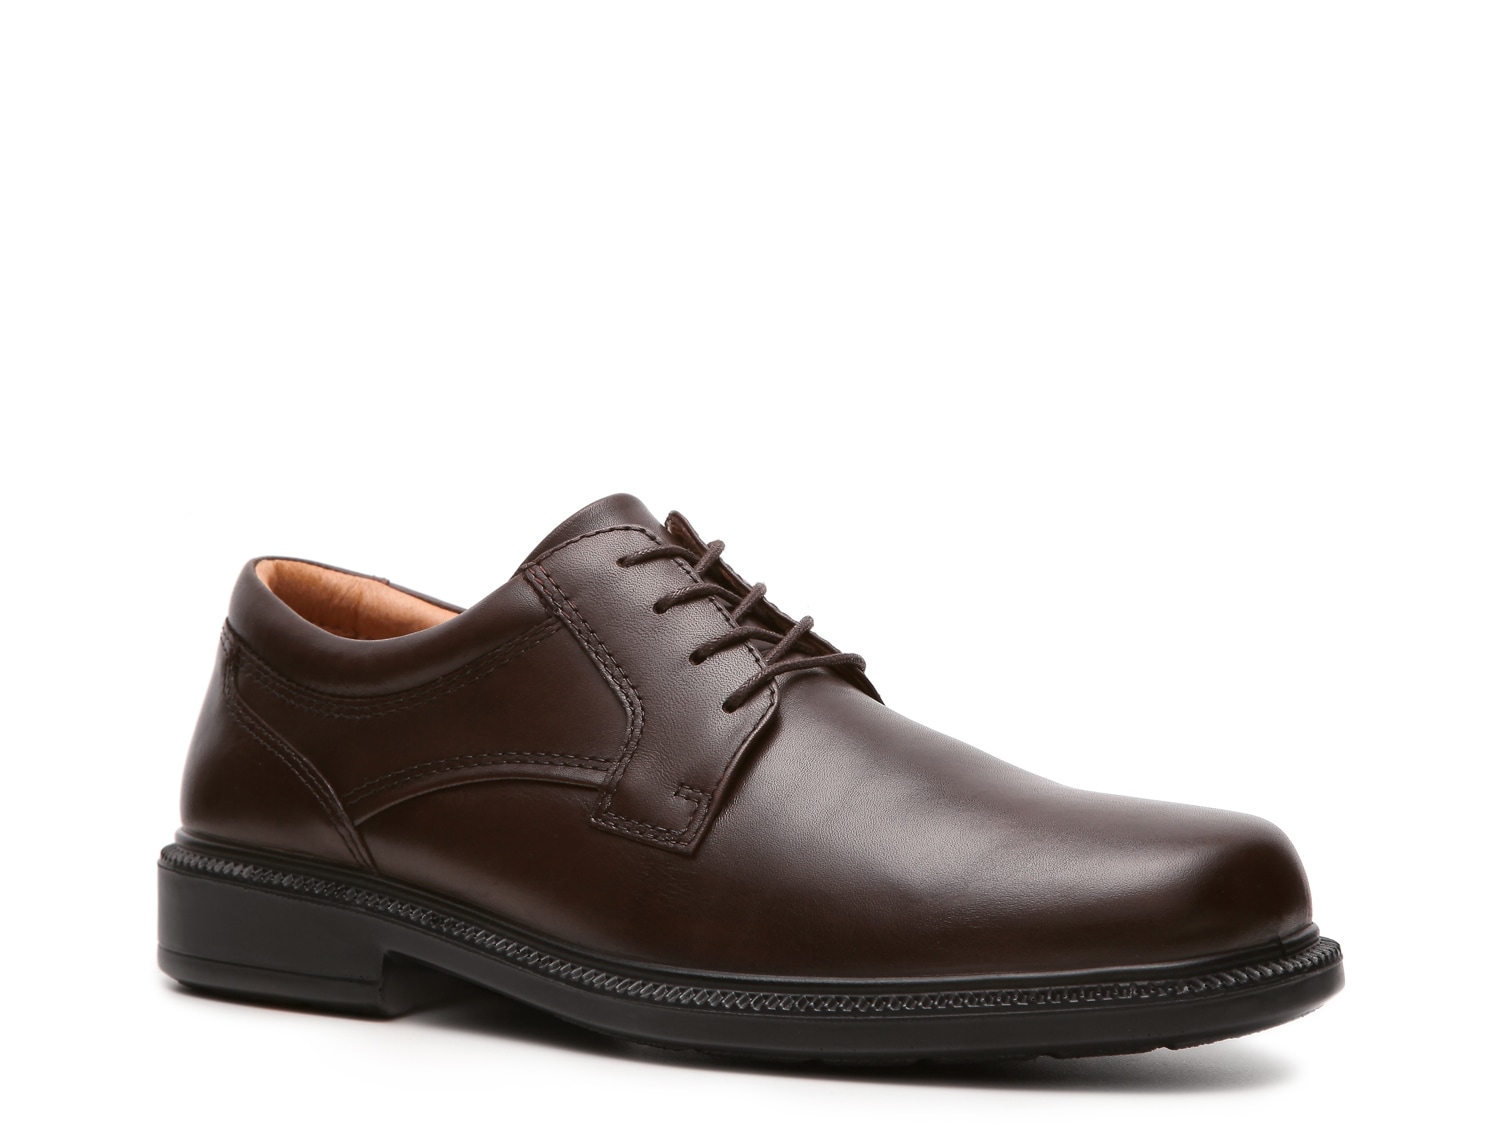 Hush Puppies Hush Puppies Strategy Oxford - Free Shipping | DSW